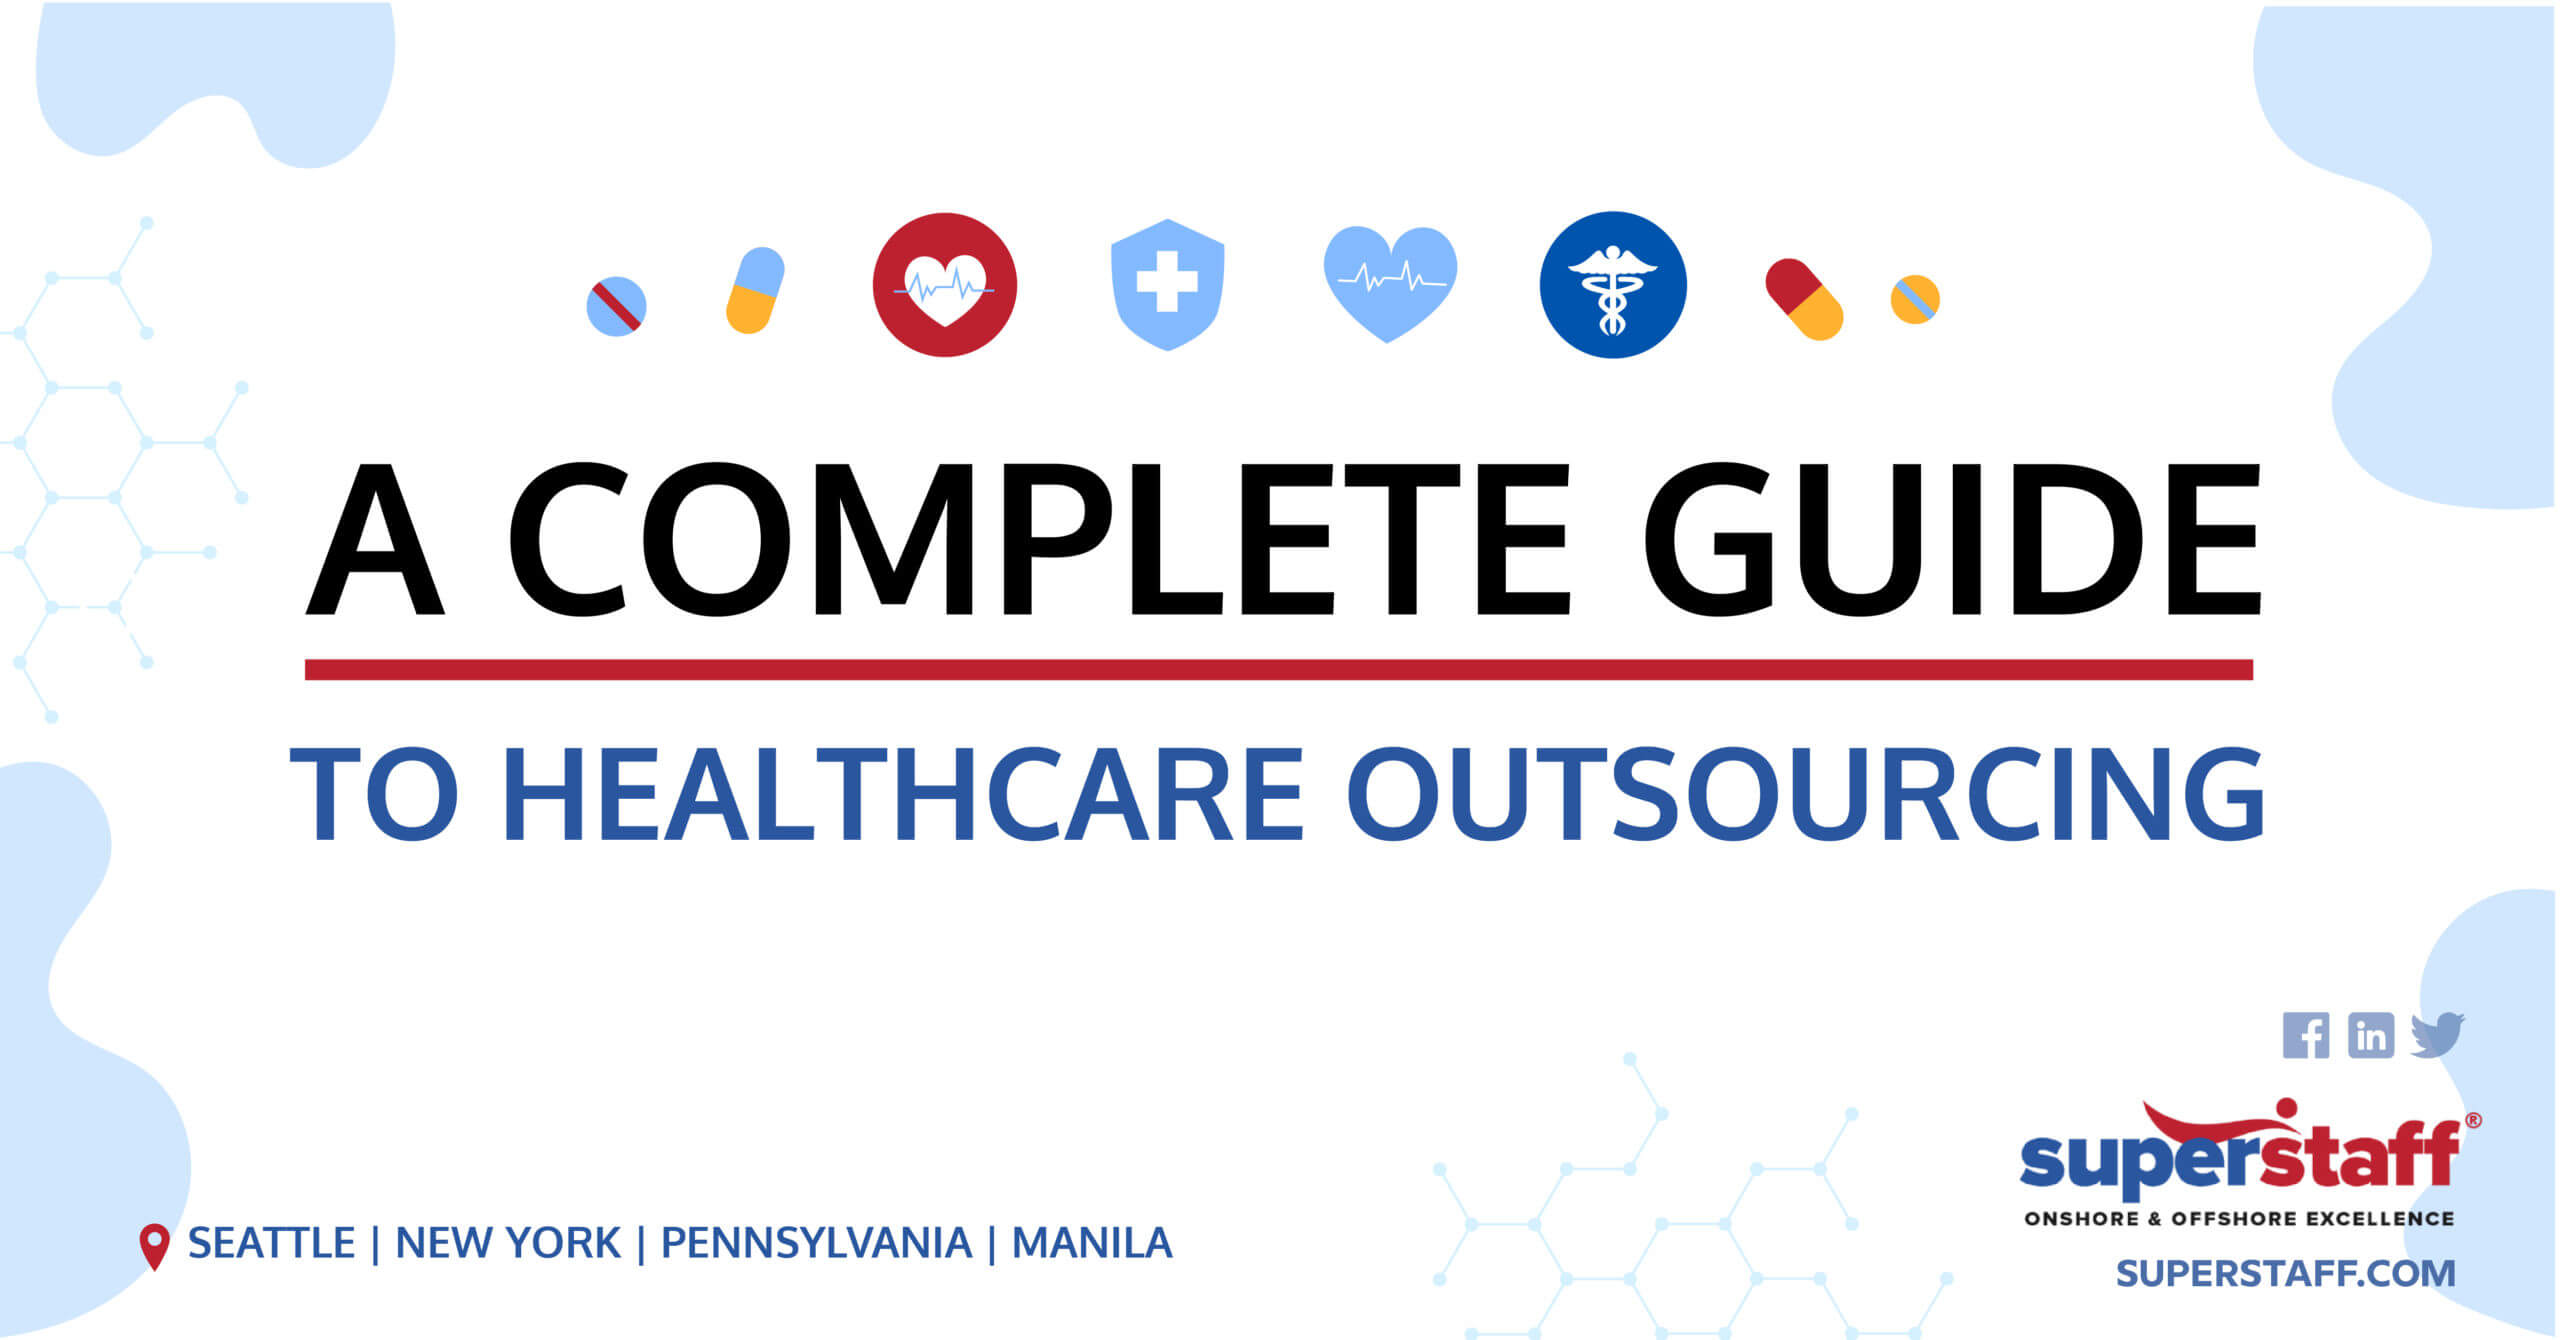 Complete Guide to Healthcare Outsourcing